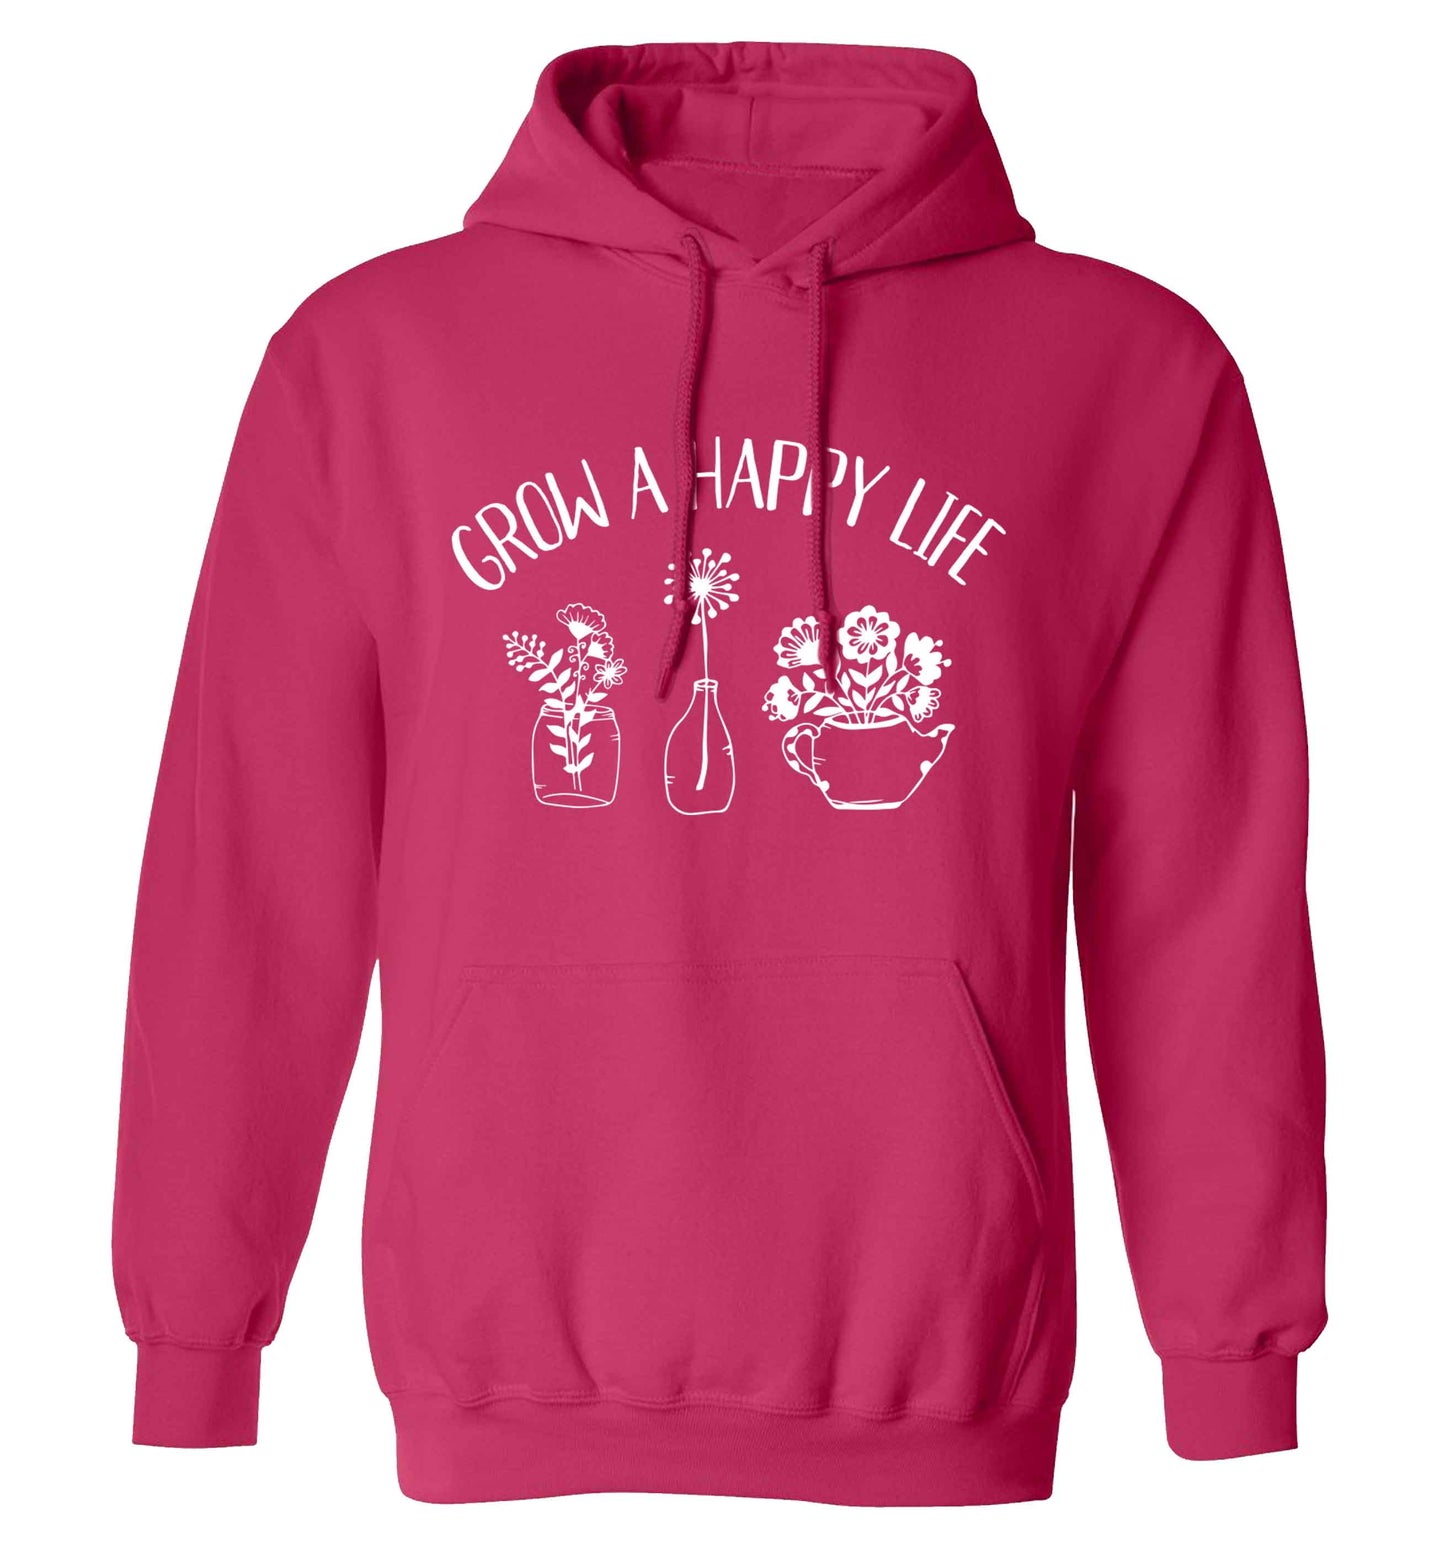 Grow a happy life adults unisex pink hoodie 2XL